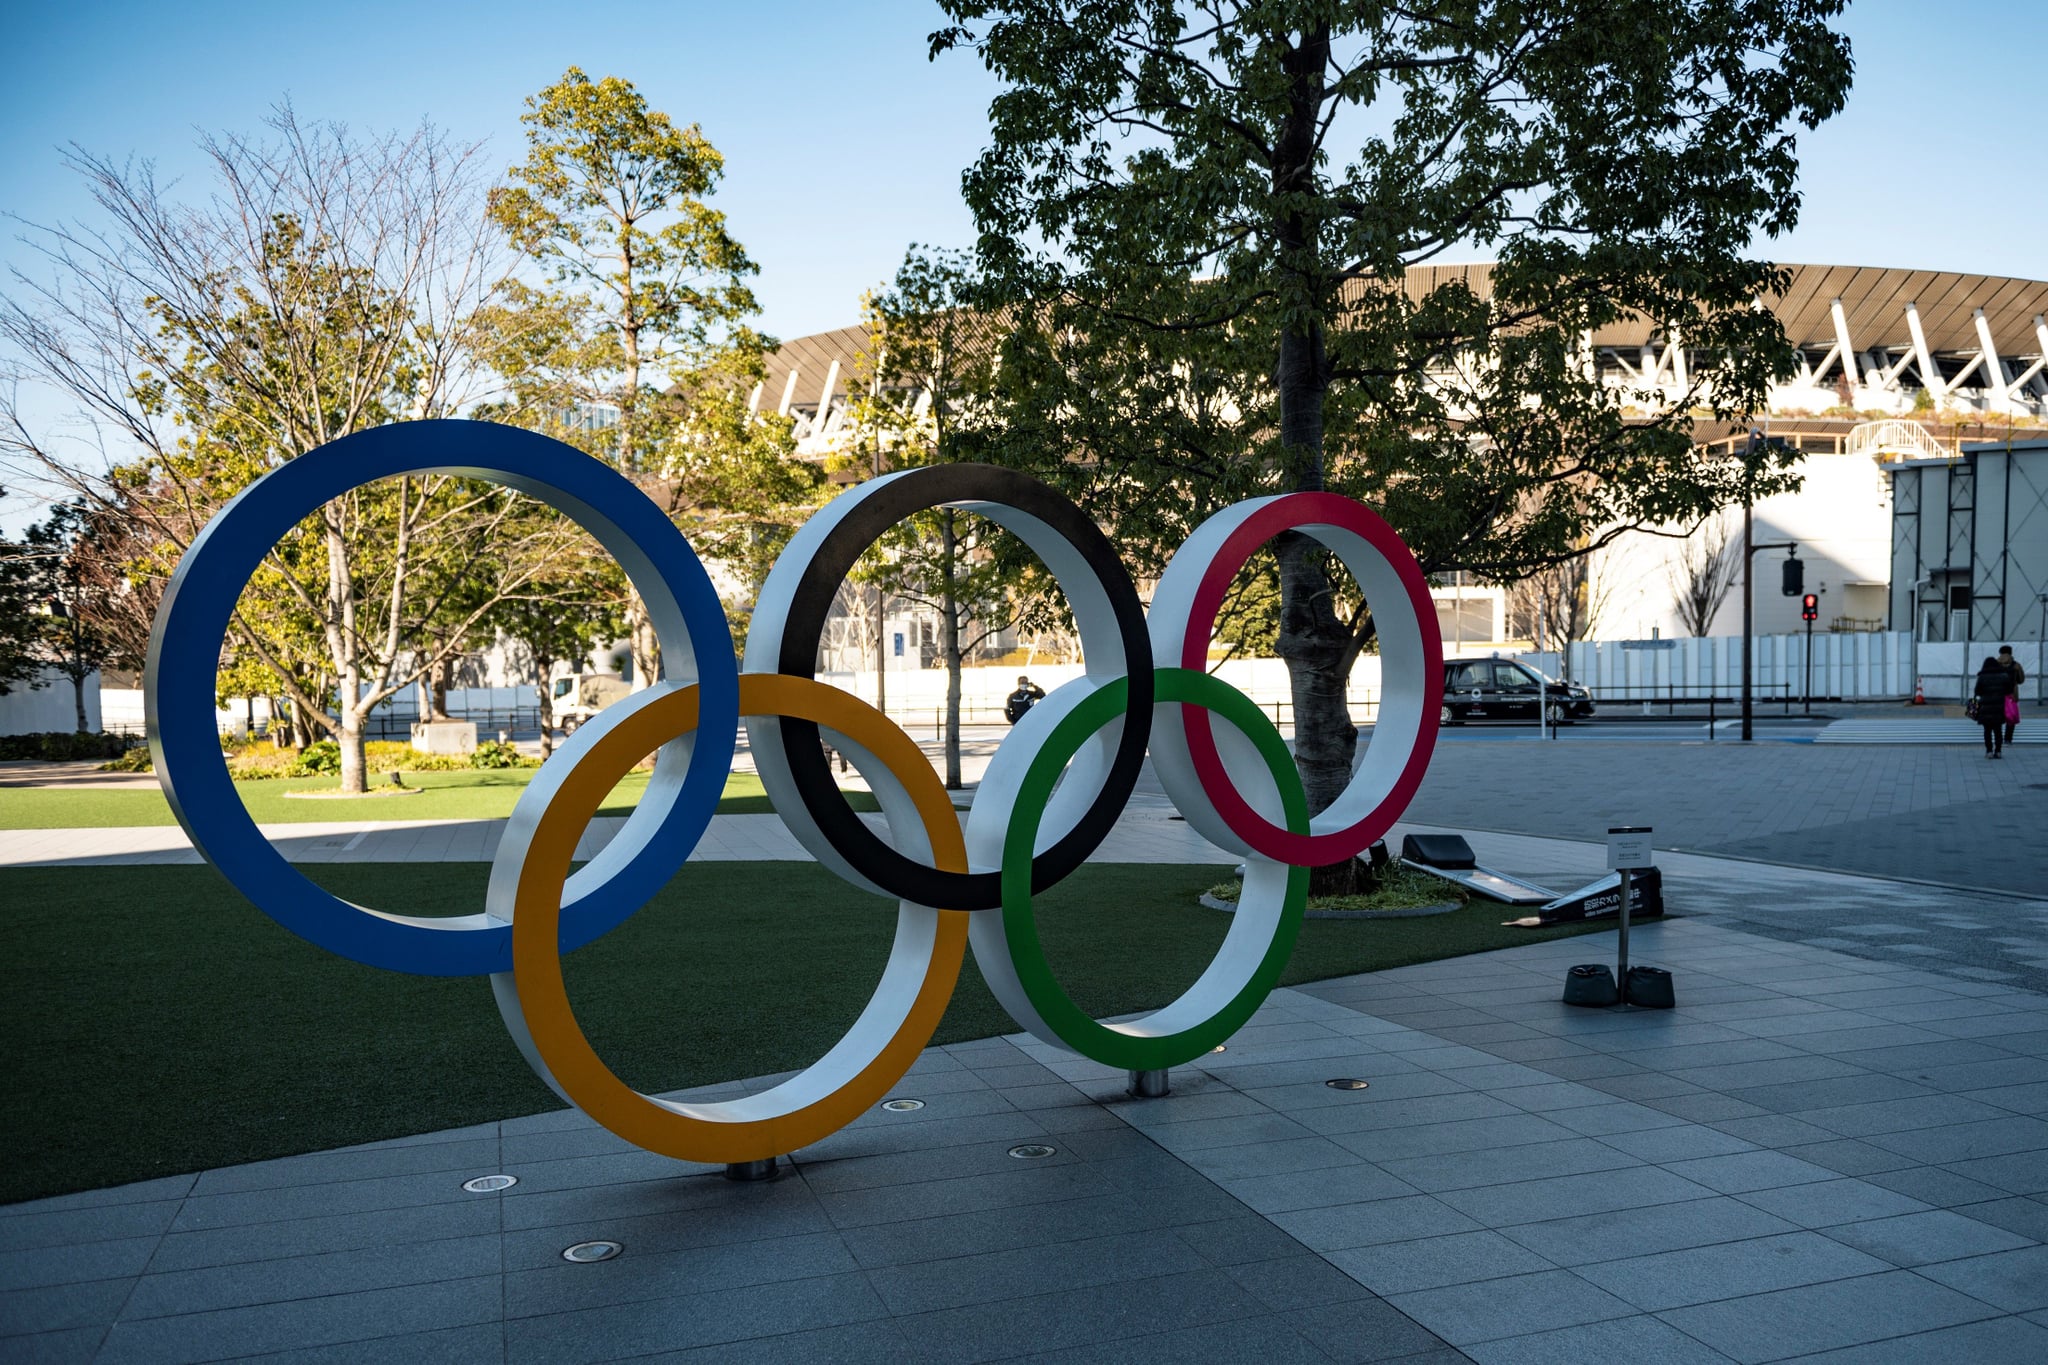 This picture taken on January 20, 2021 shows the Olympic rings outside the Olympic Museum in Tokyo. - When the Tokyo Olympics were postponed last year, officials promised they would open in 2021 as proof of humankind's triumph over the coronavirus. But six months before the delayed start, victory over the virus remains distant, and fears are growing rapidly that the Games of the 32nd Olympiad may not happen at all. (Photo by Philip FONG / AFP) / TO GO WITH AFP STORY OLY-2020-2021-JAPAN-VIRUS-HEALTH BY ANDREW MCKIRDY (Photo by PHILIP FONG/AFP via Getty Images)